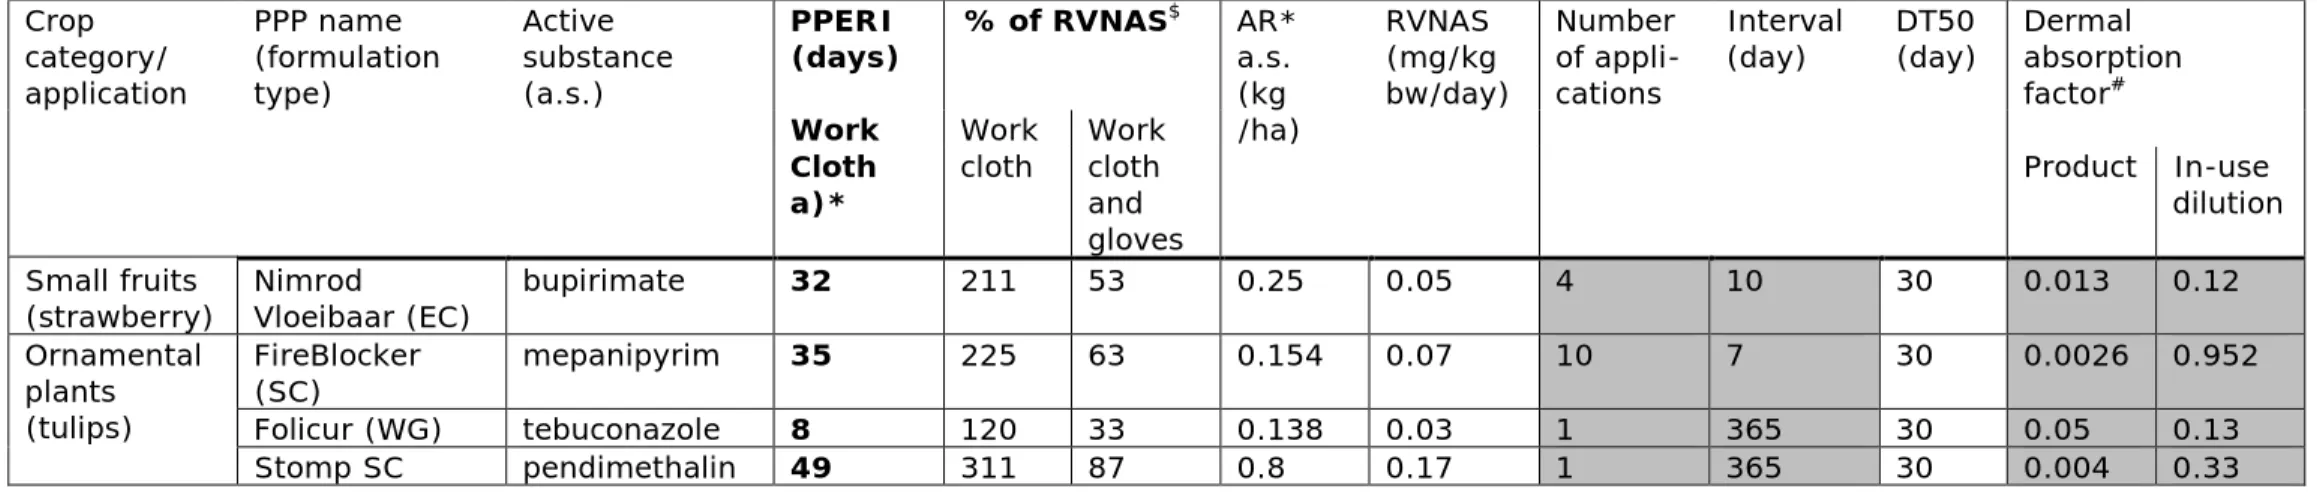 Table 3 -2: Safe re-entry time (PPERI) after typical spray application of 4 PPPs for 3 different crop categories (orchards, small fruits)  for one worker’s exposure scenario:  a) wearing working cloth but no gloves, are presented; re-entry without gloves a